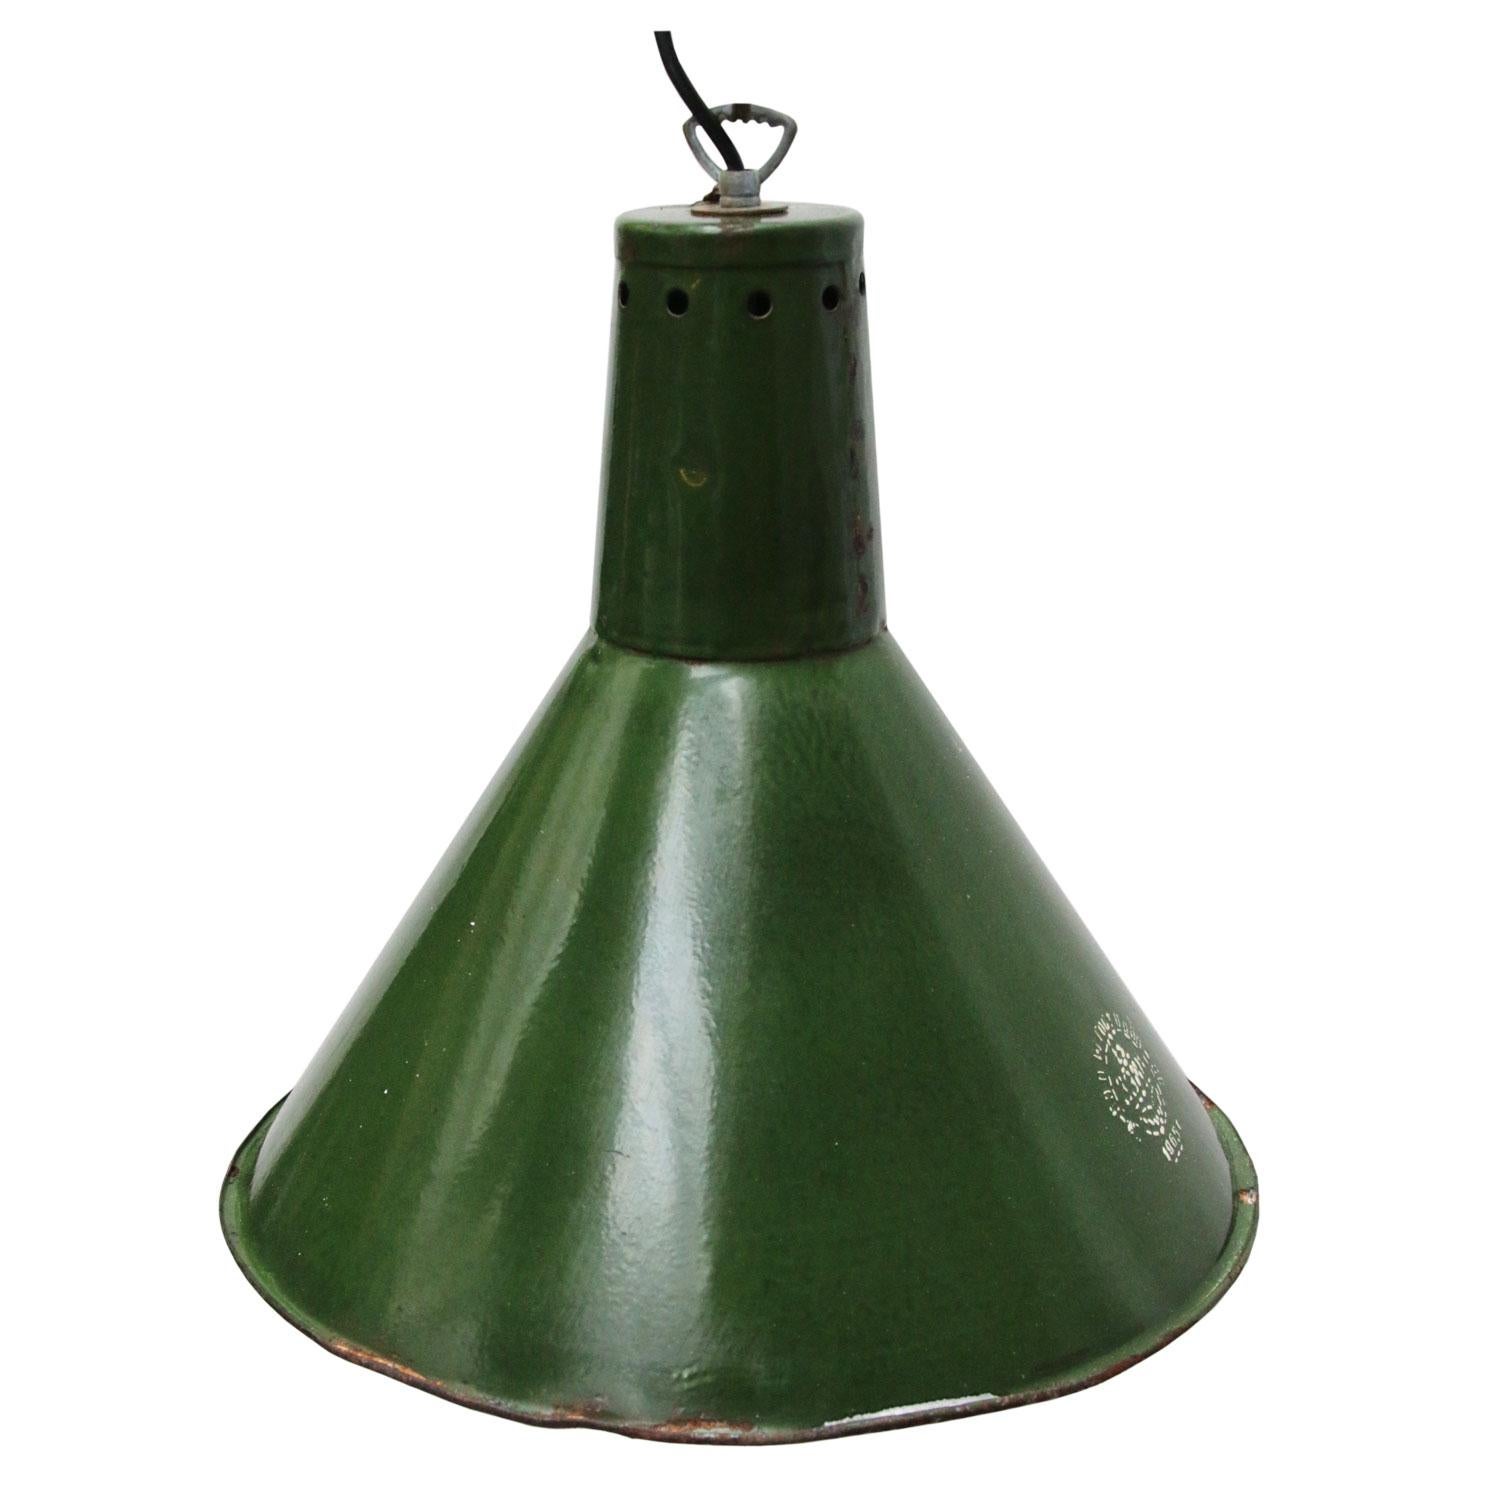 Green enamel factory pendant from the Ukraine.
White interior.

Weight: 2.0 kg / 4.4 lb

Priced per individual item. All lamps have been made suitable by international standards for incandescent light bulbs, energy-efficient and LED bulbs. E26/E27